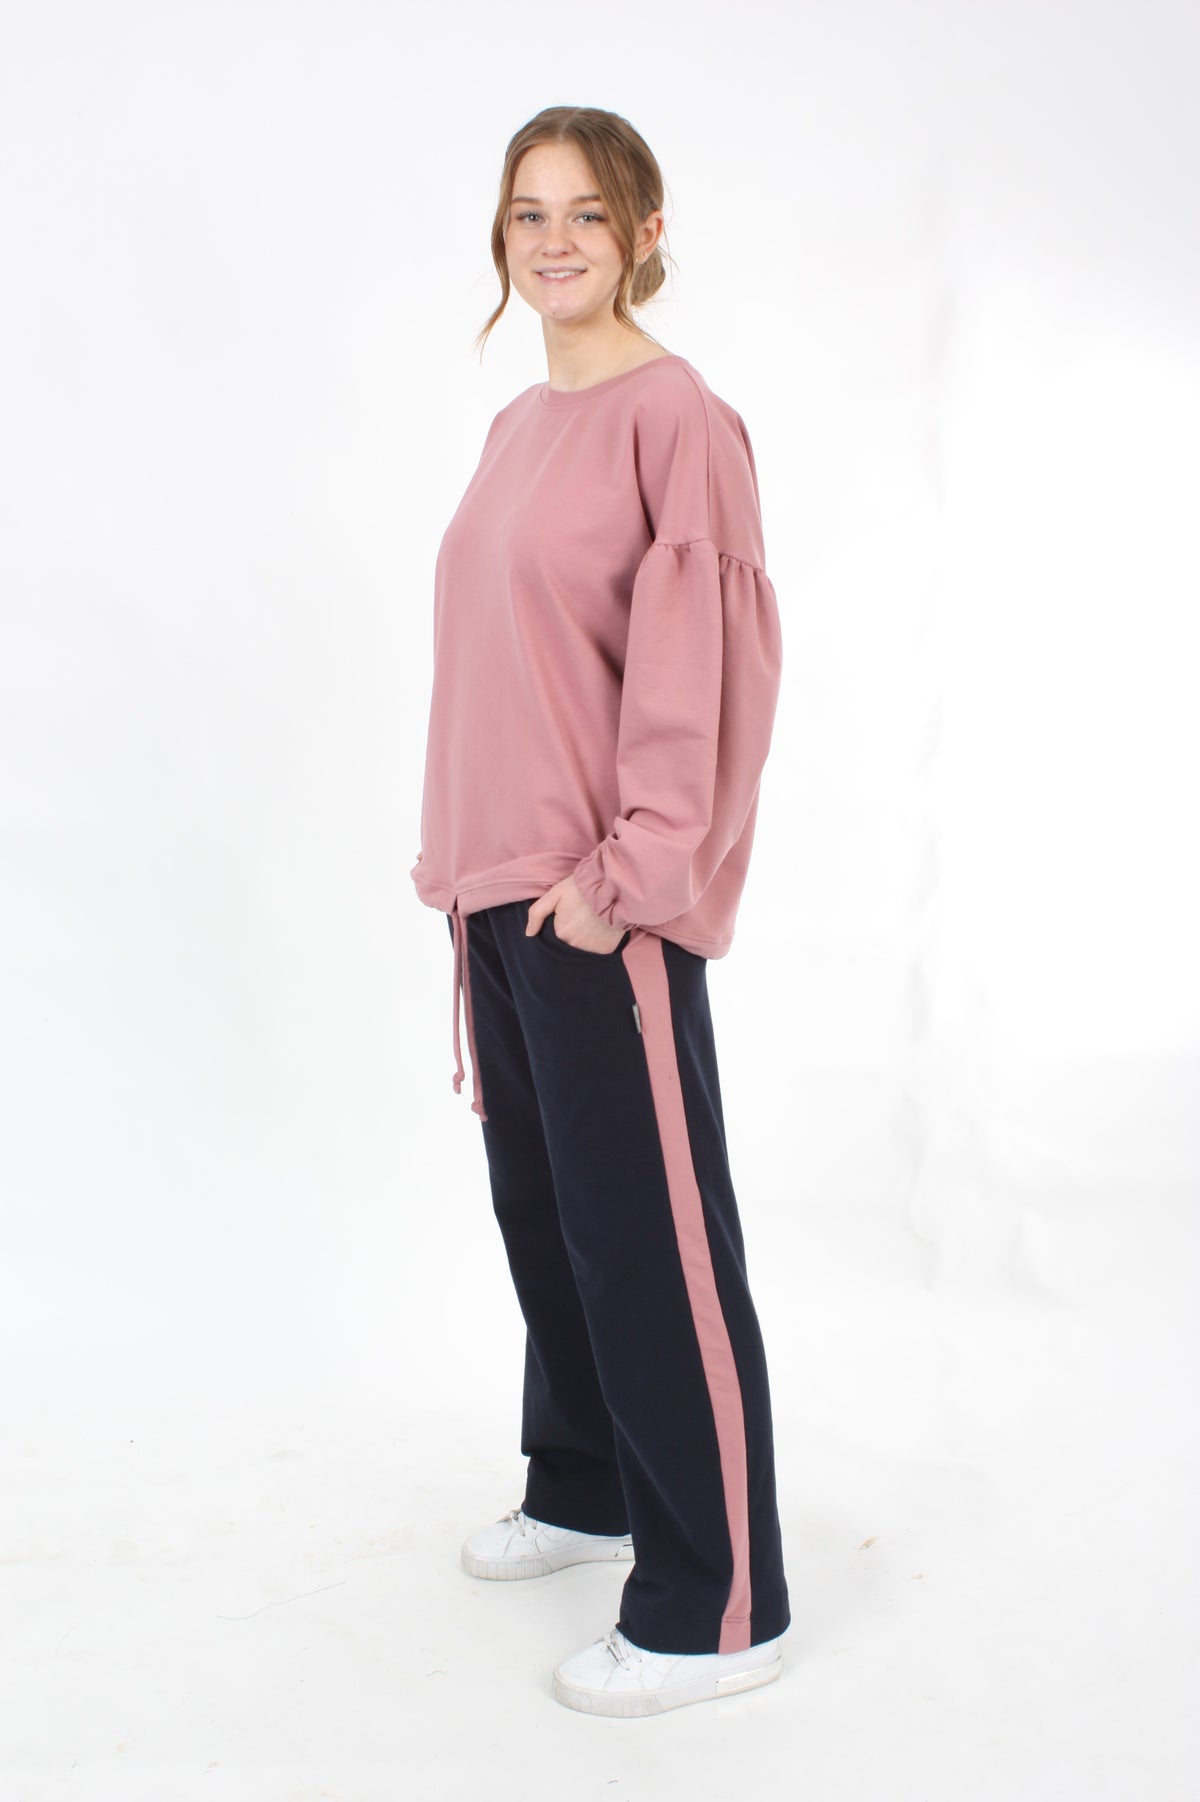 Olivia Sweat Pants - Navy with Pink Stripe